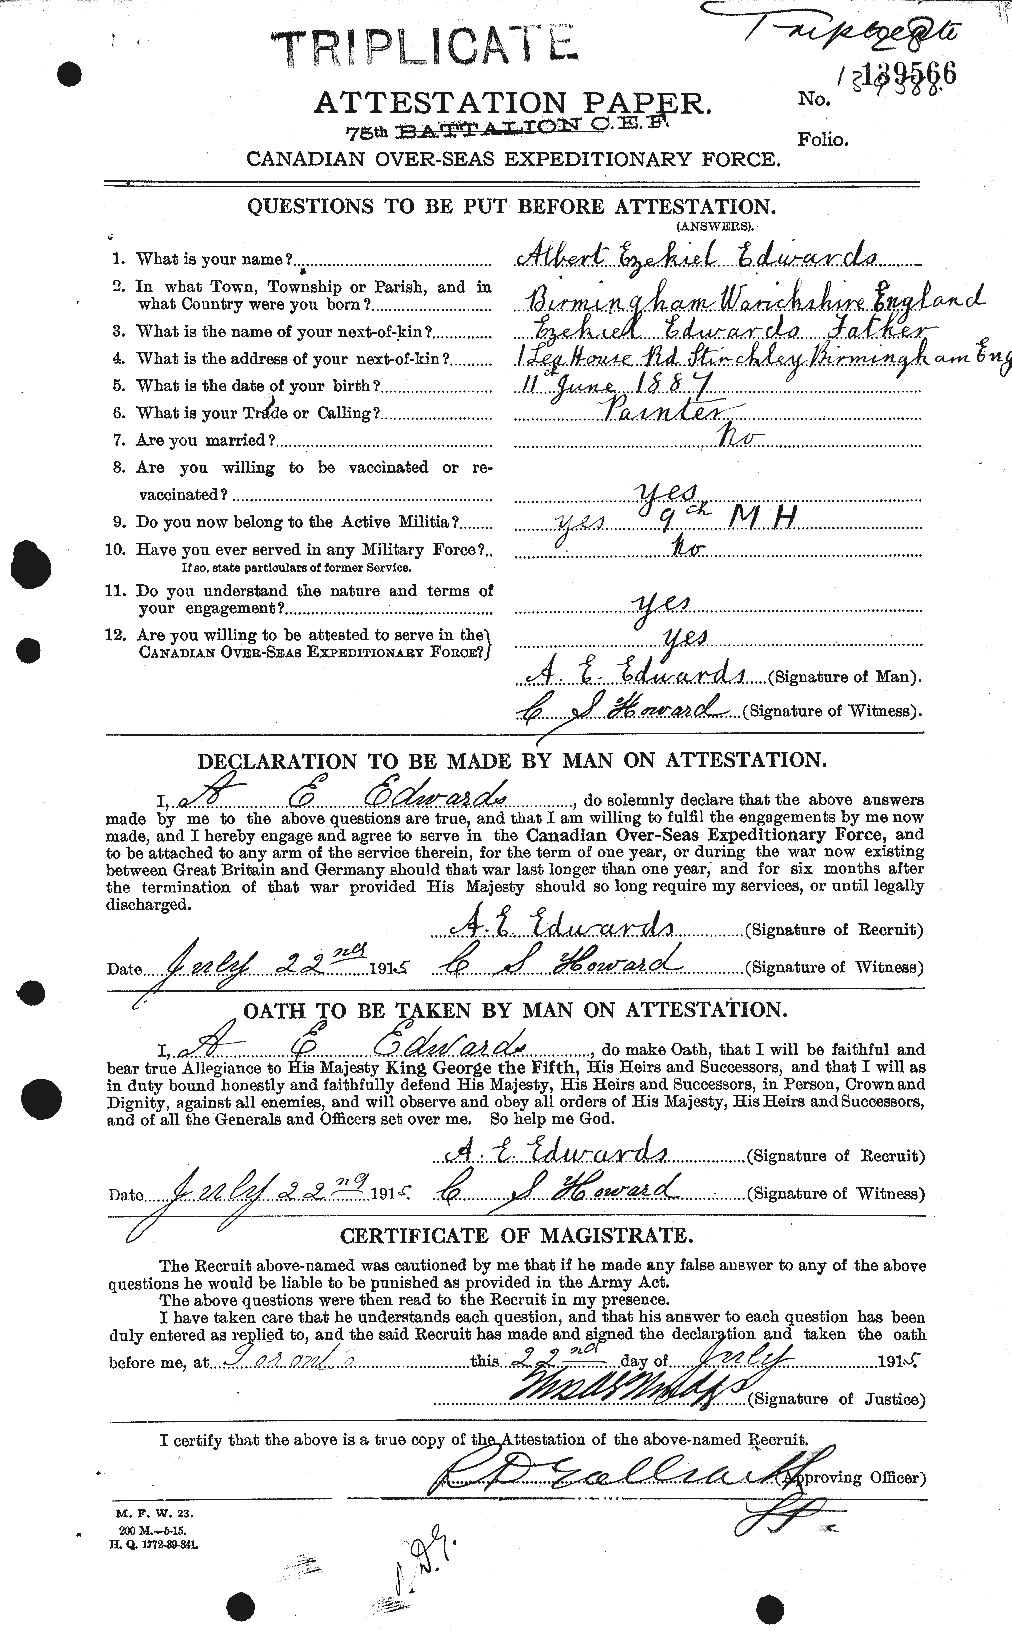 Personnel Records of the First World War - CEF 313092a